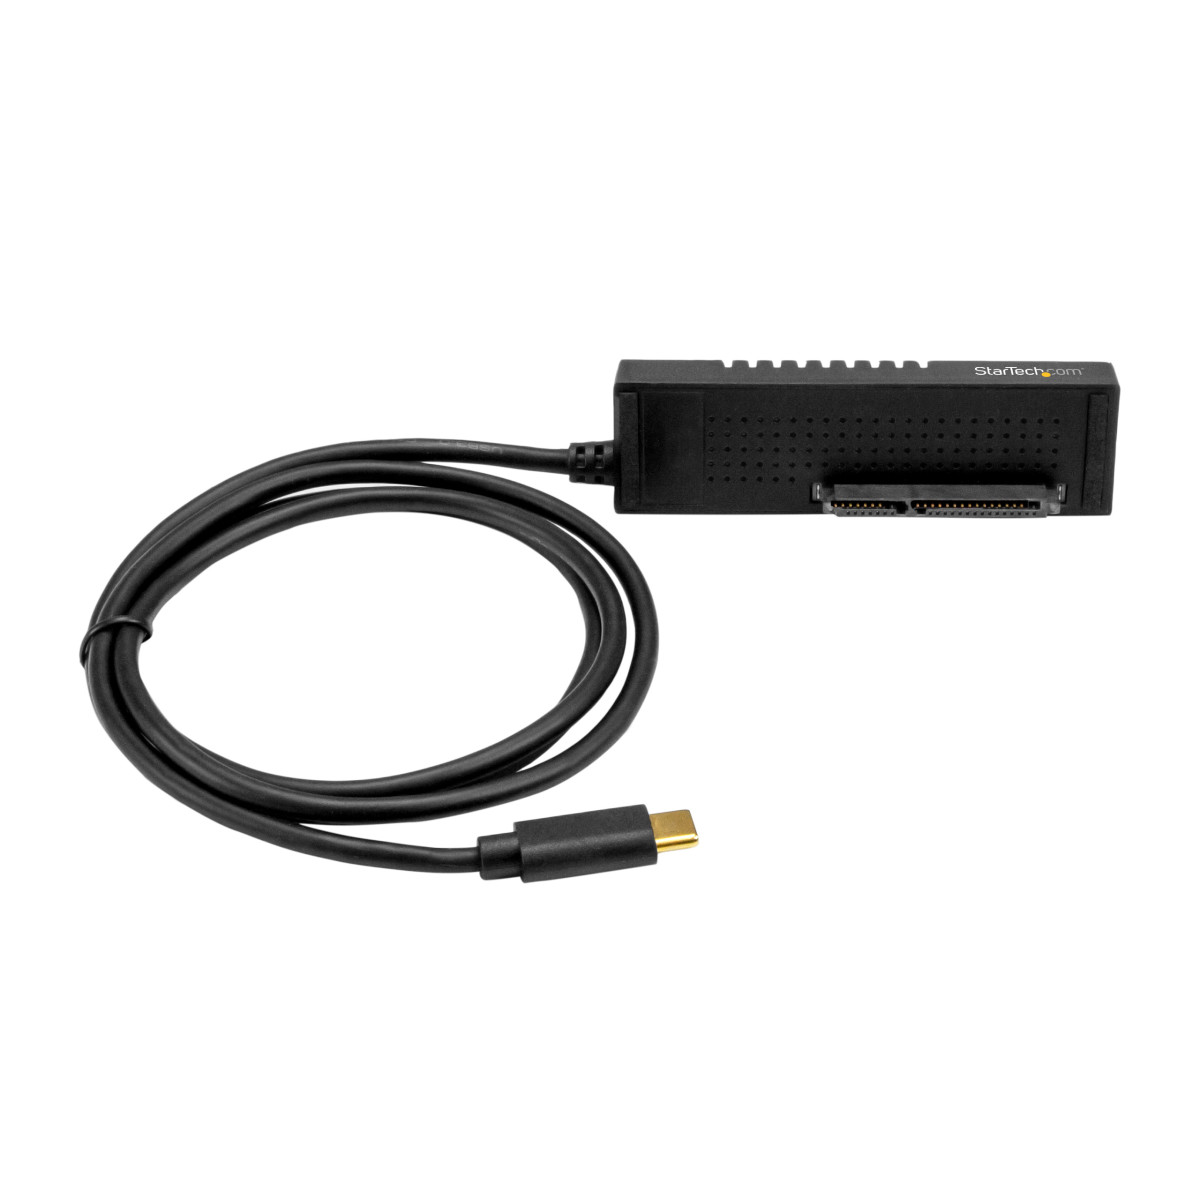 USB C SATA Adapter for 2.5/3.5 SSD/HDDs